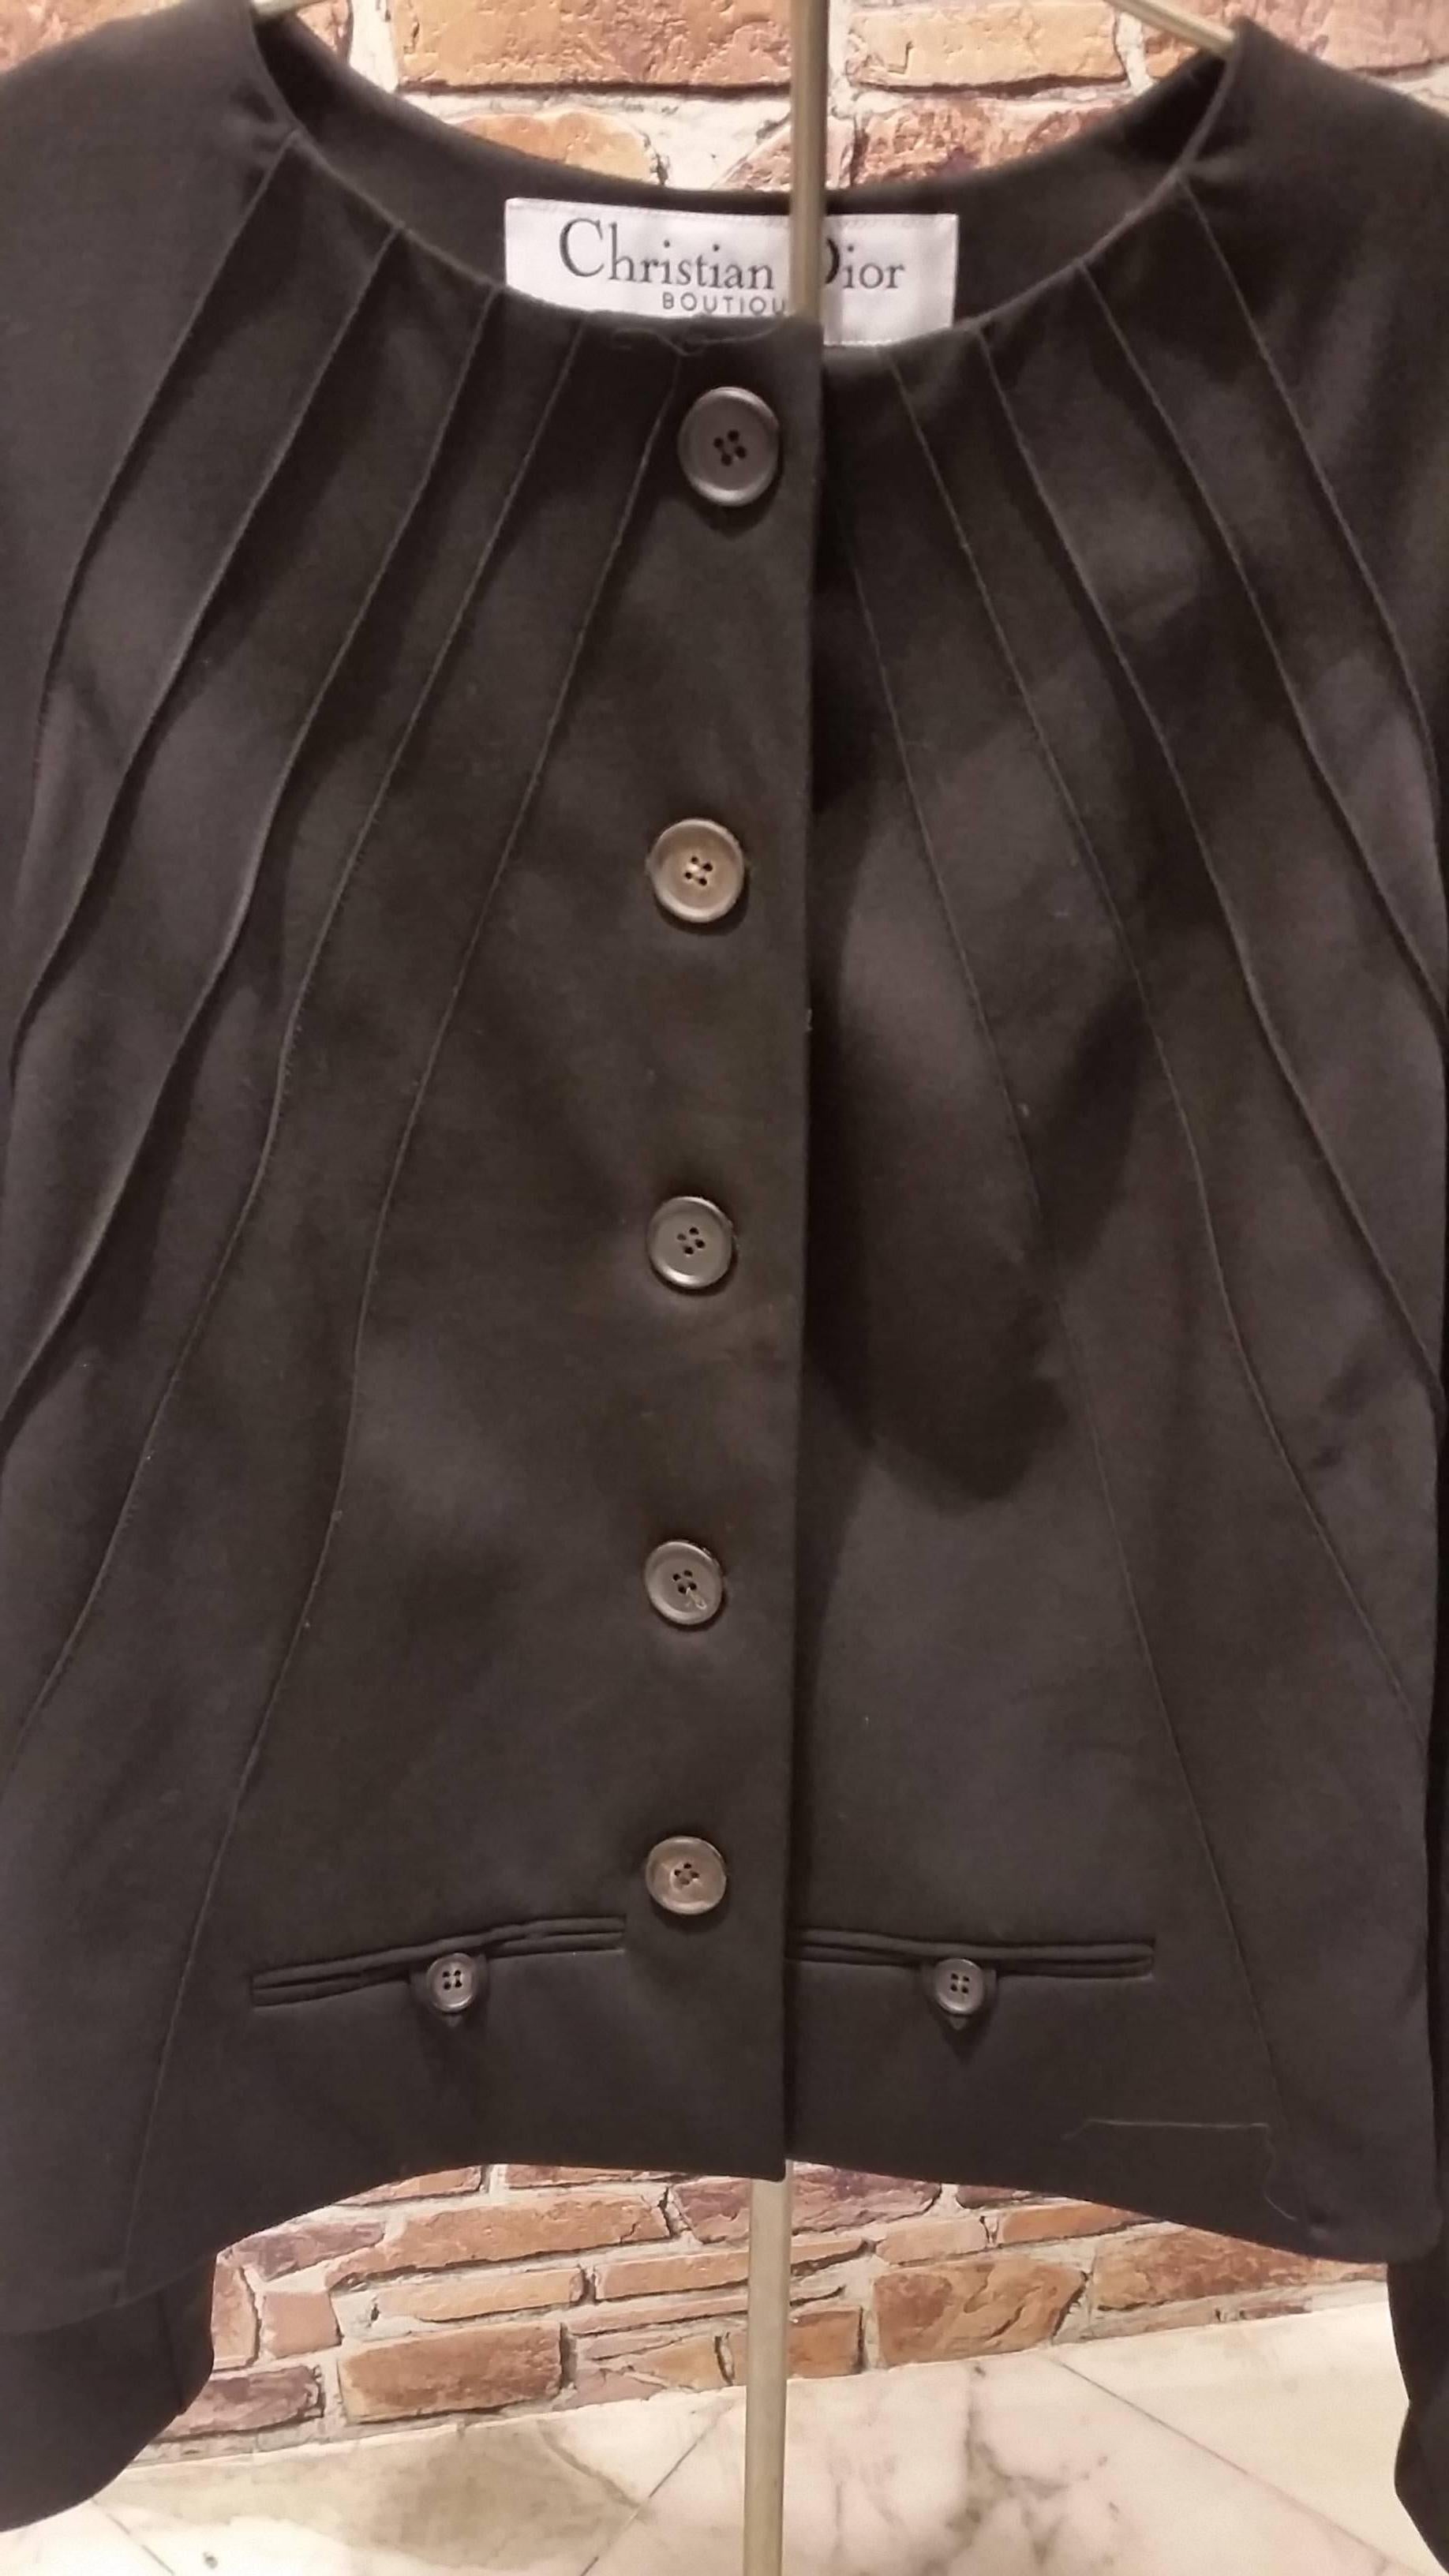 1990s Christian Dior black jacket in size 42 inside is white

composition is 75 % wool
12 % nylon
12% viscose
1% lycra

lining 100% viscose